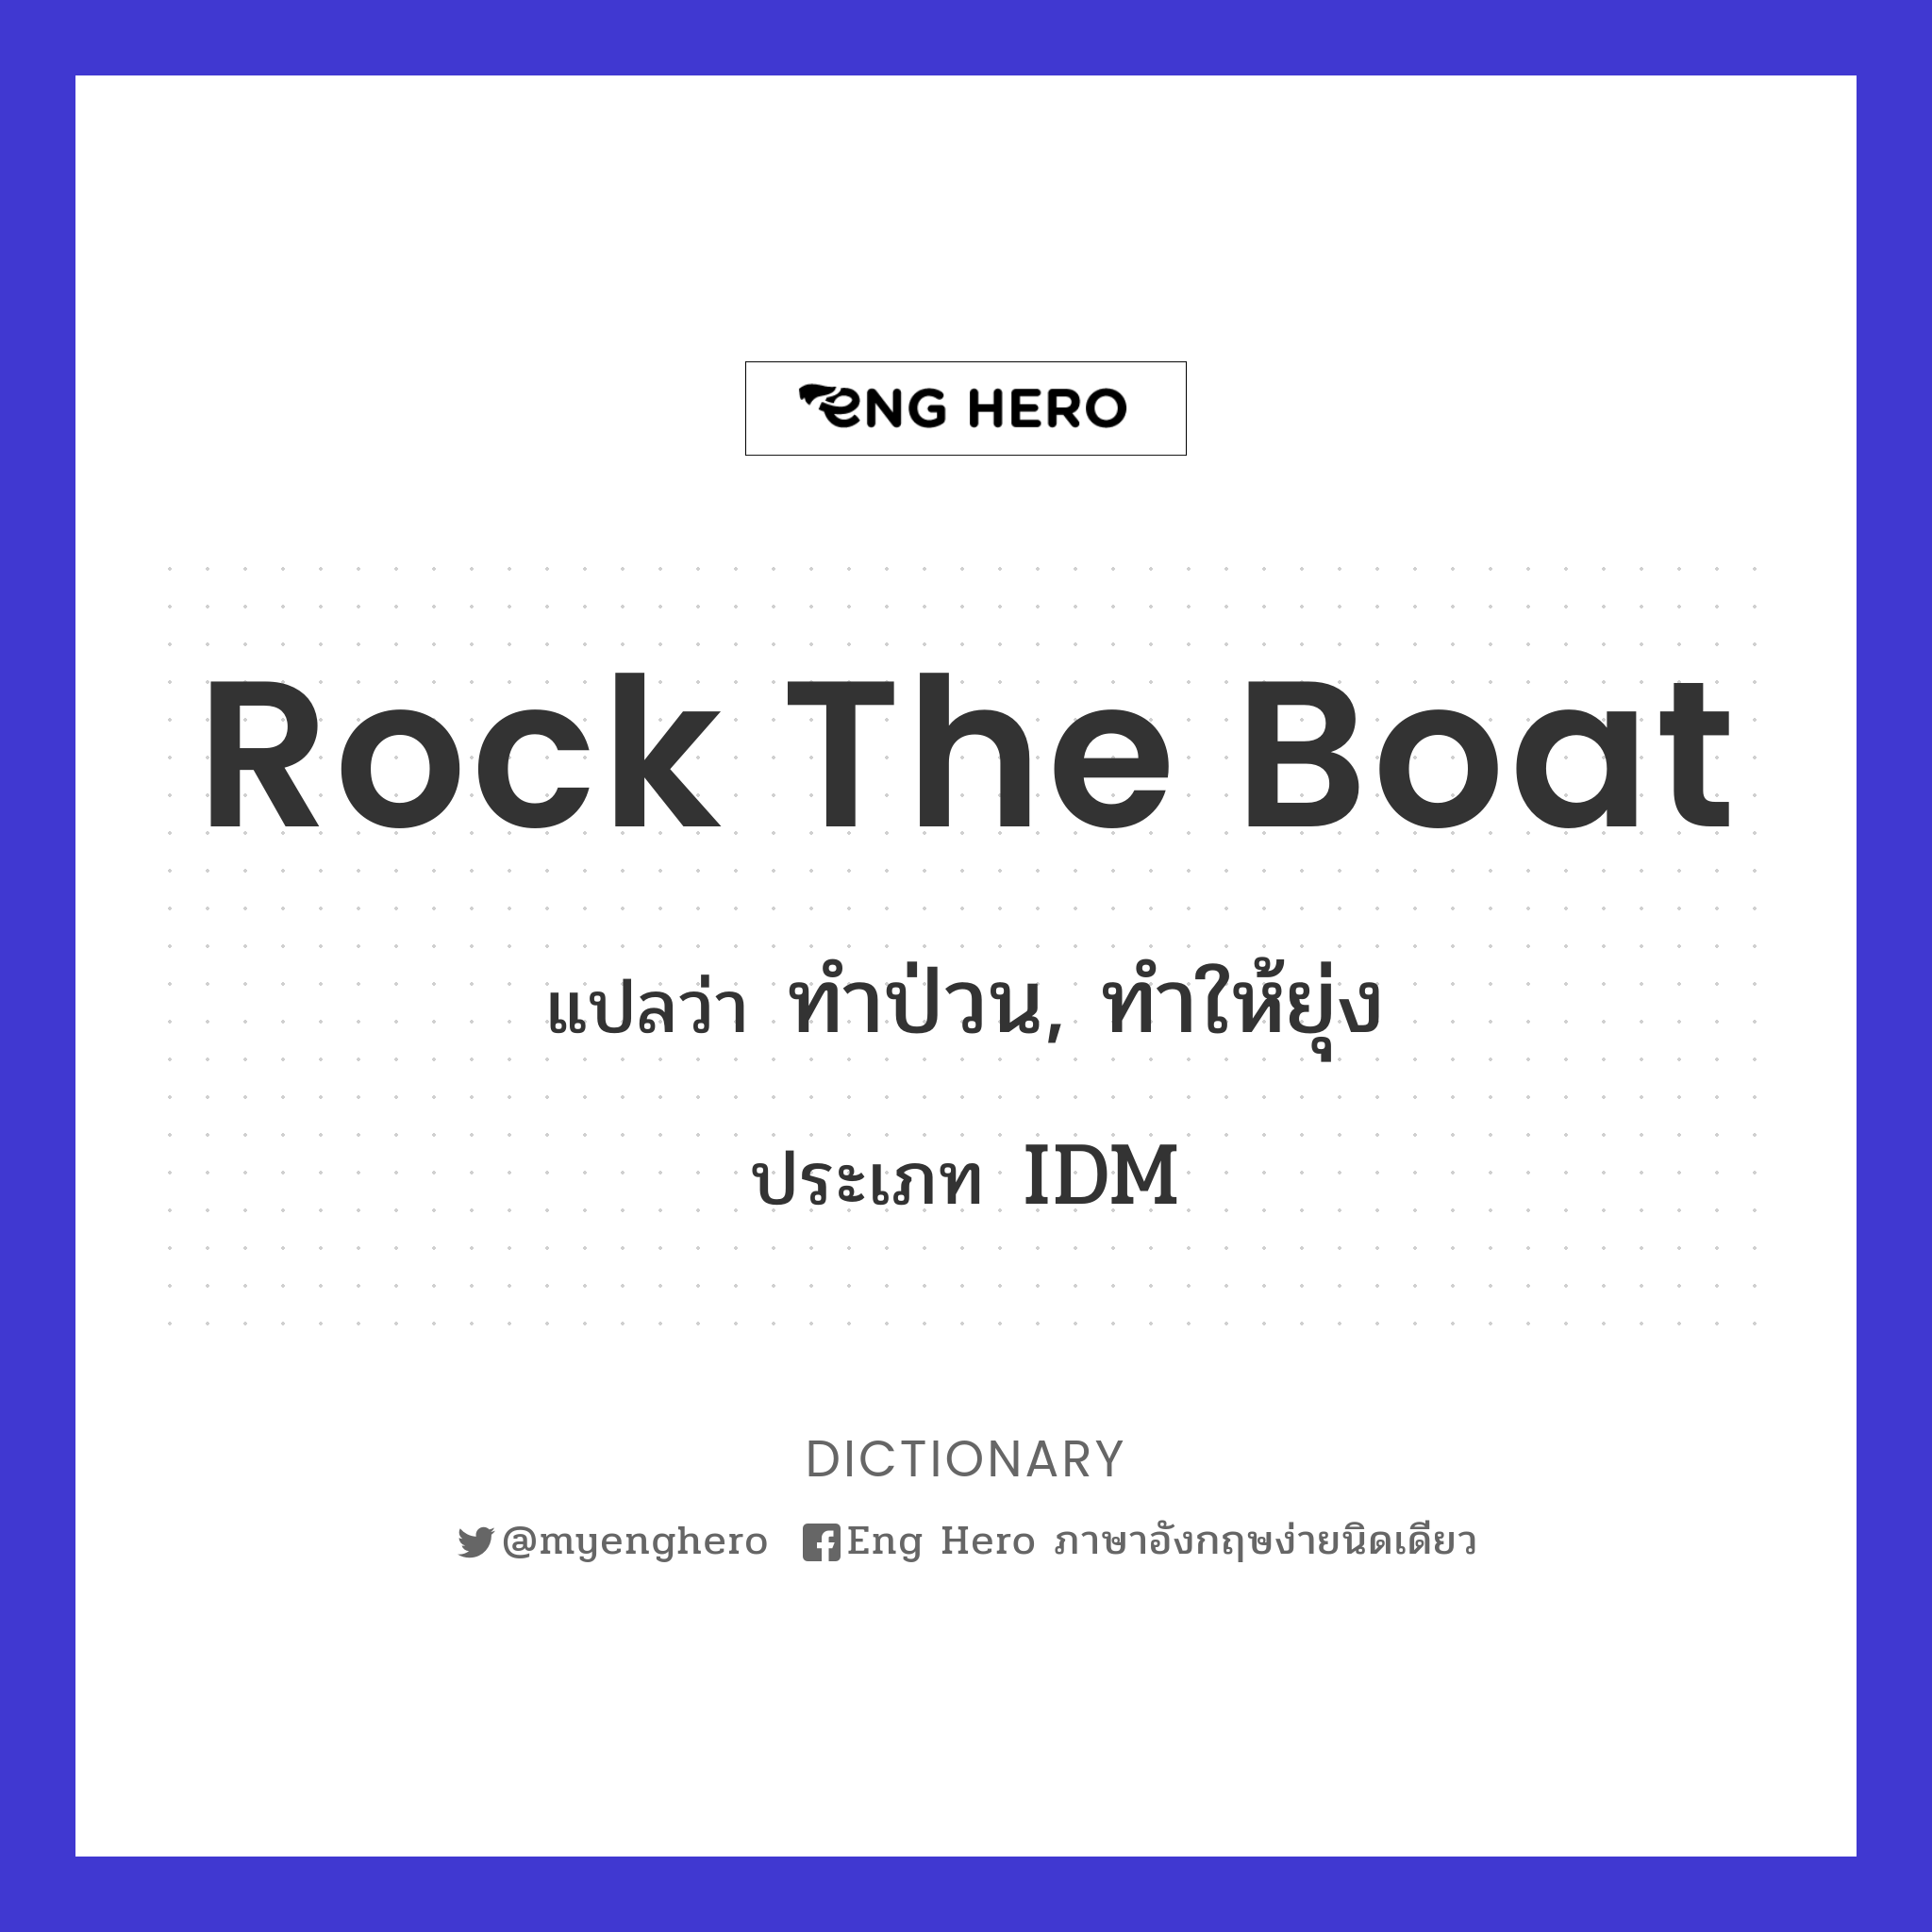 rock the boat